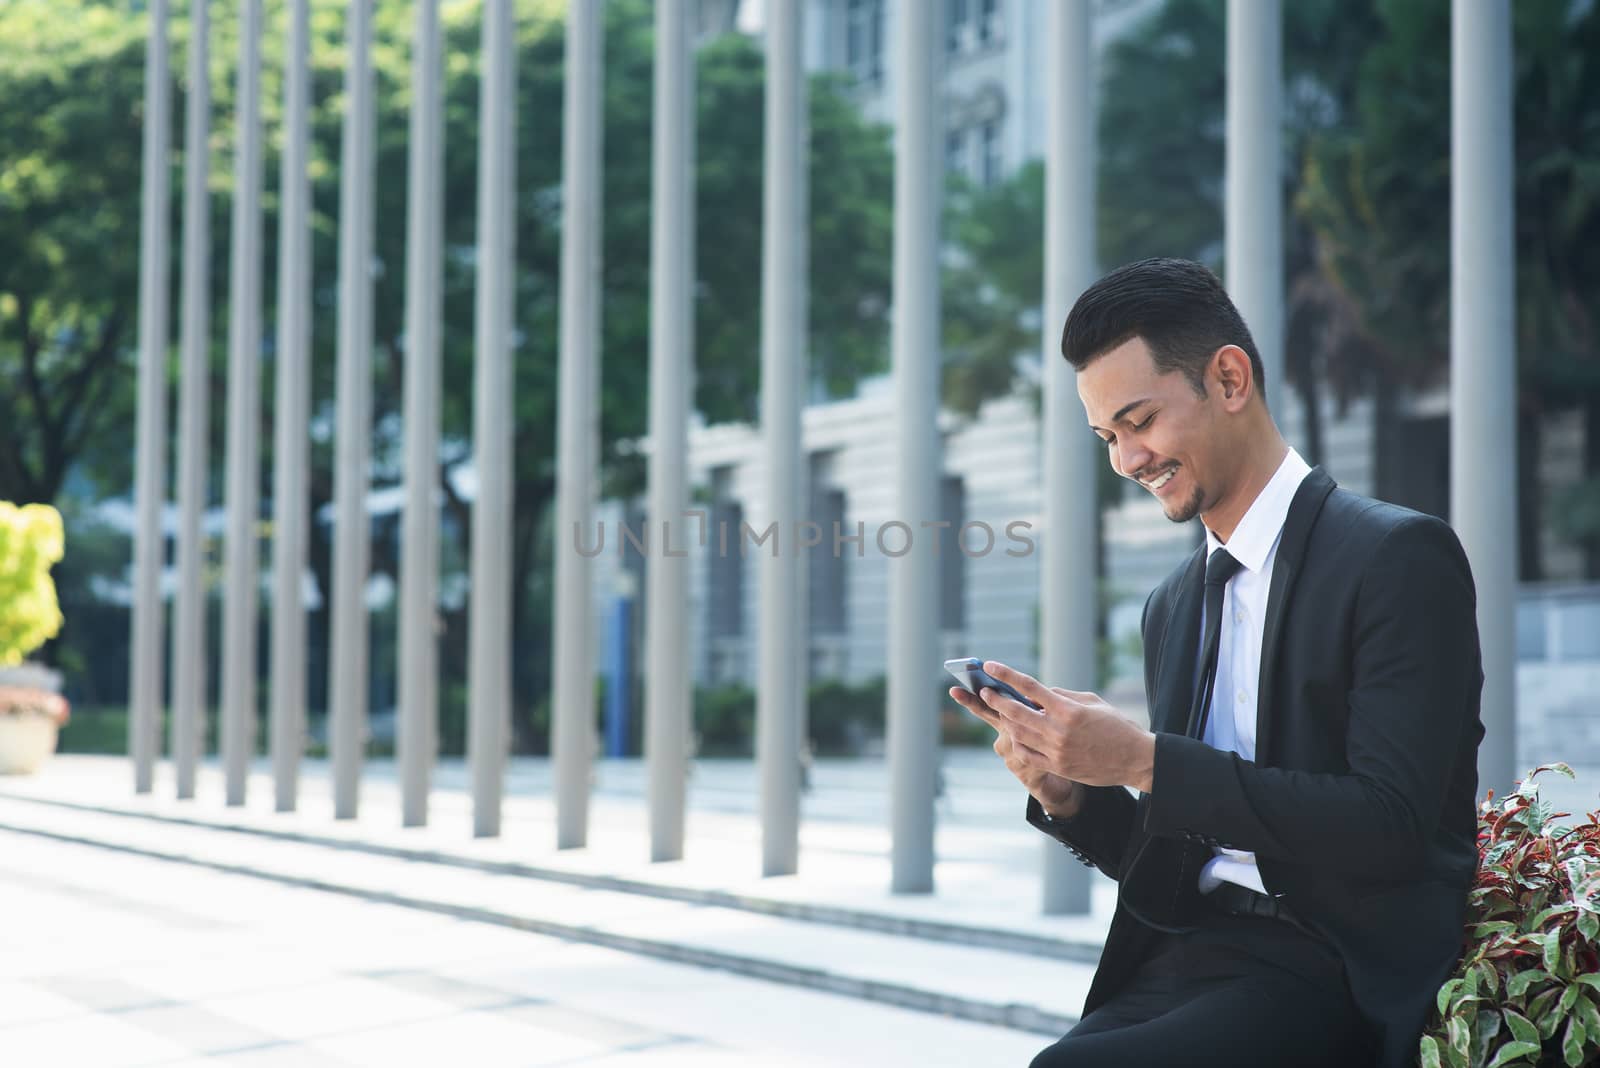 Businessman using mobile phone outdoor during office hour.